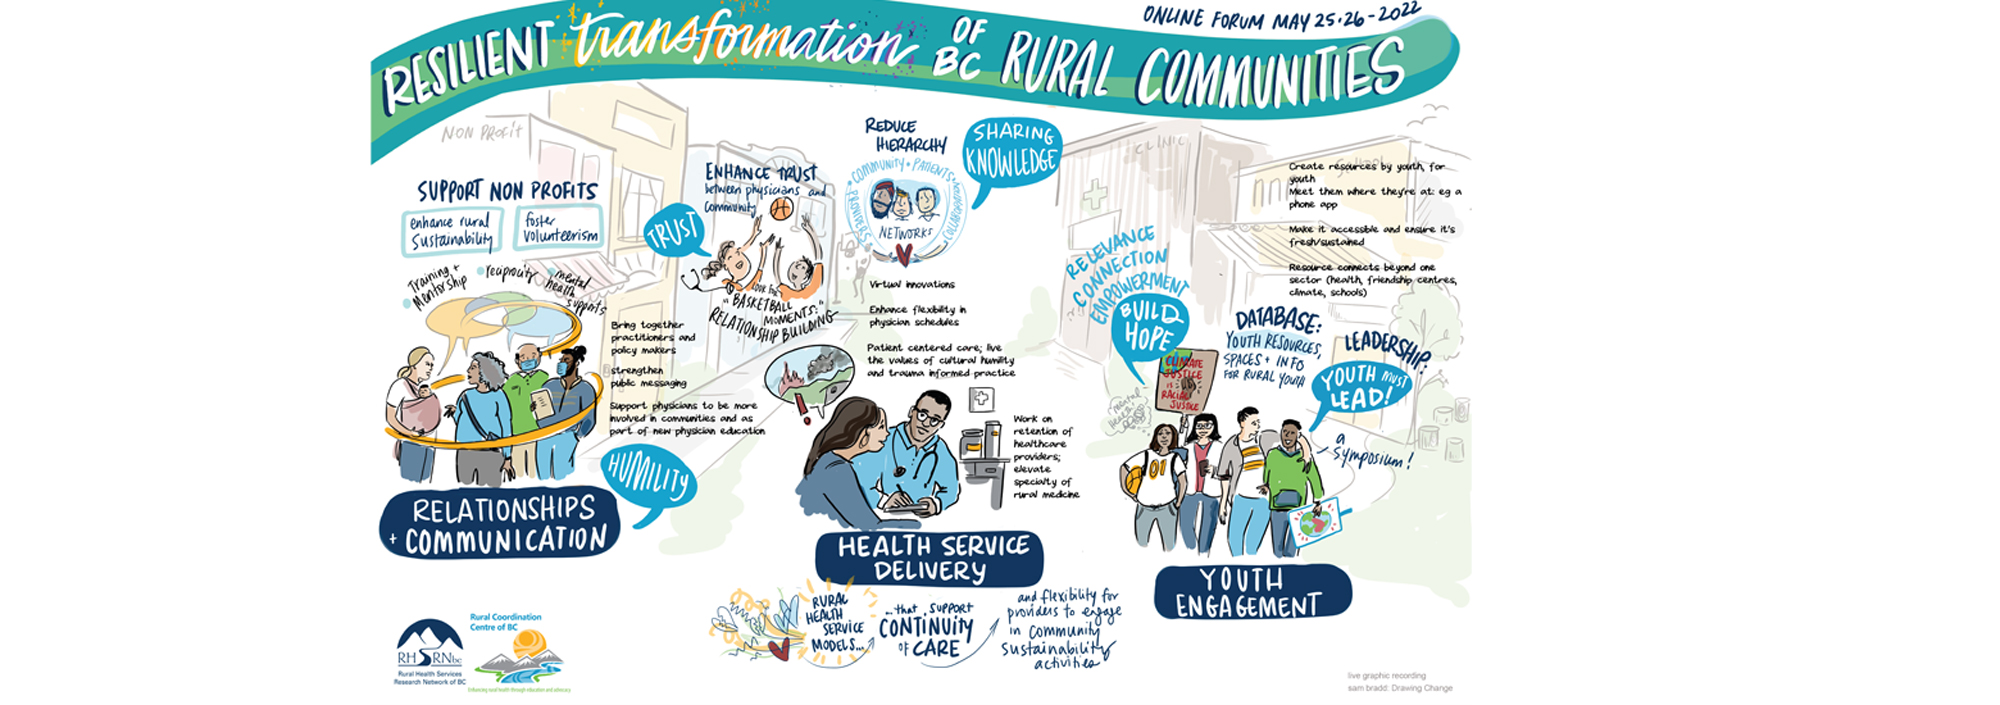 rural health illustration featuring communication, health delivery, and engagement in small group work